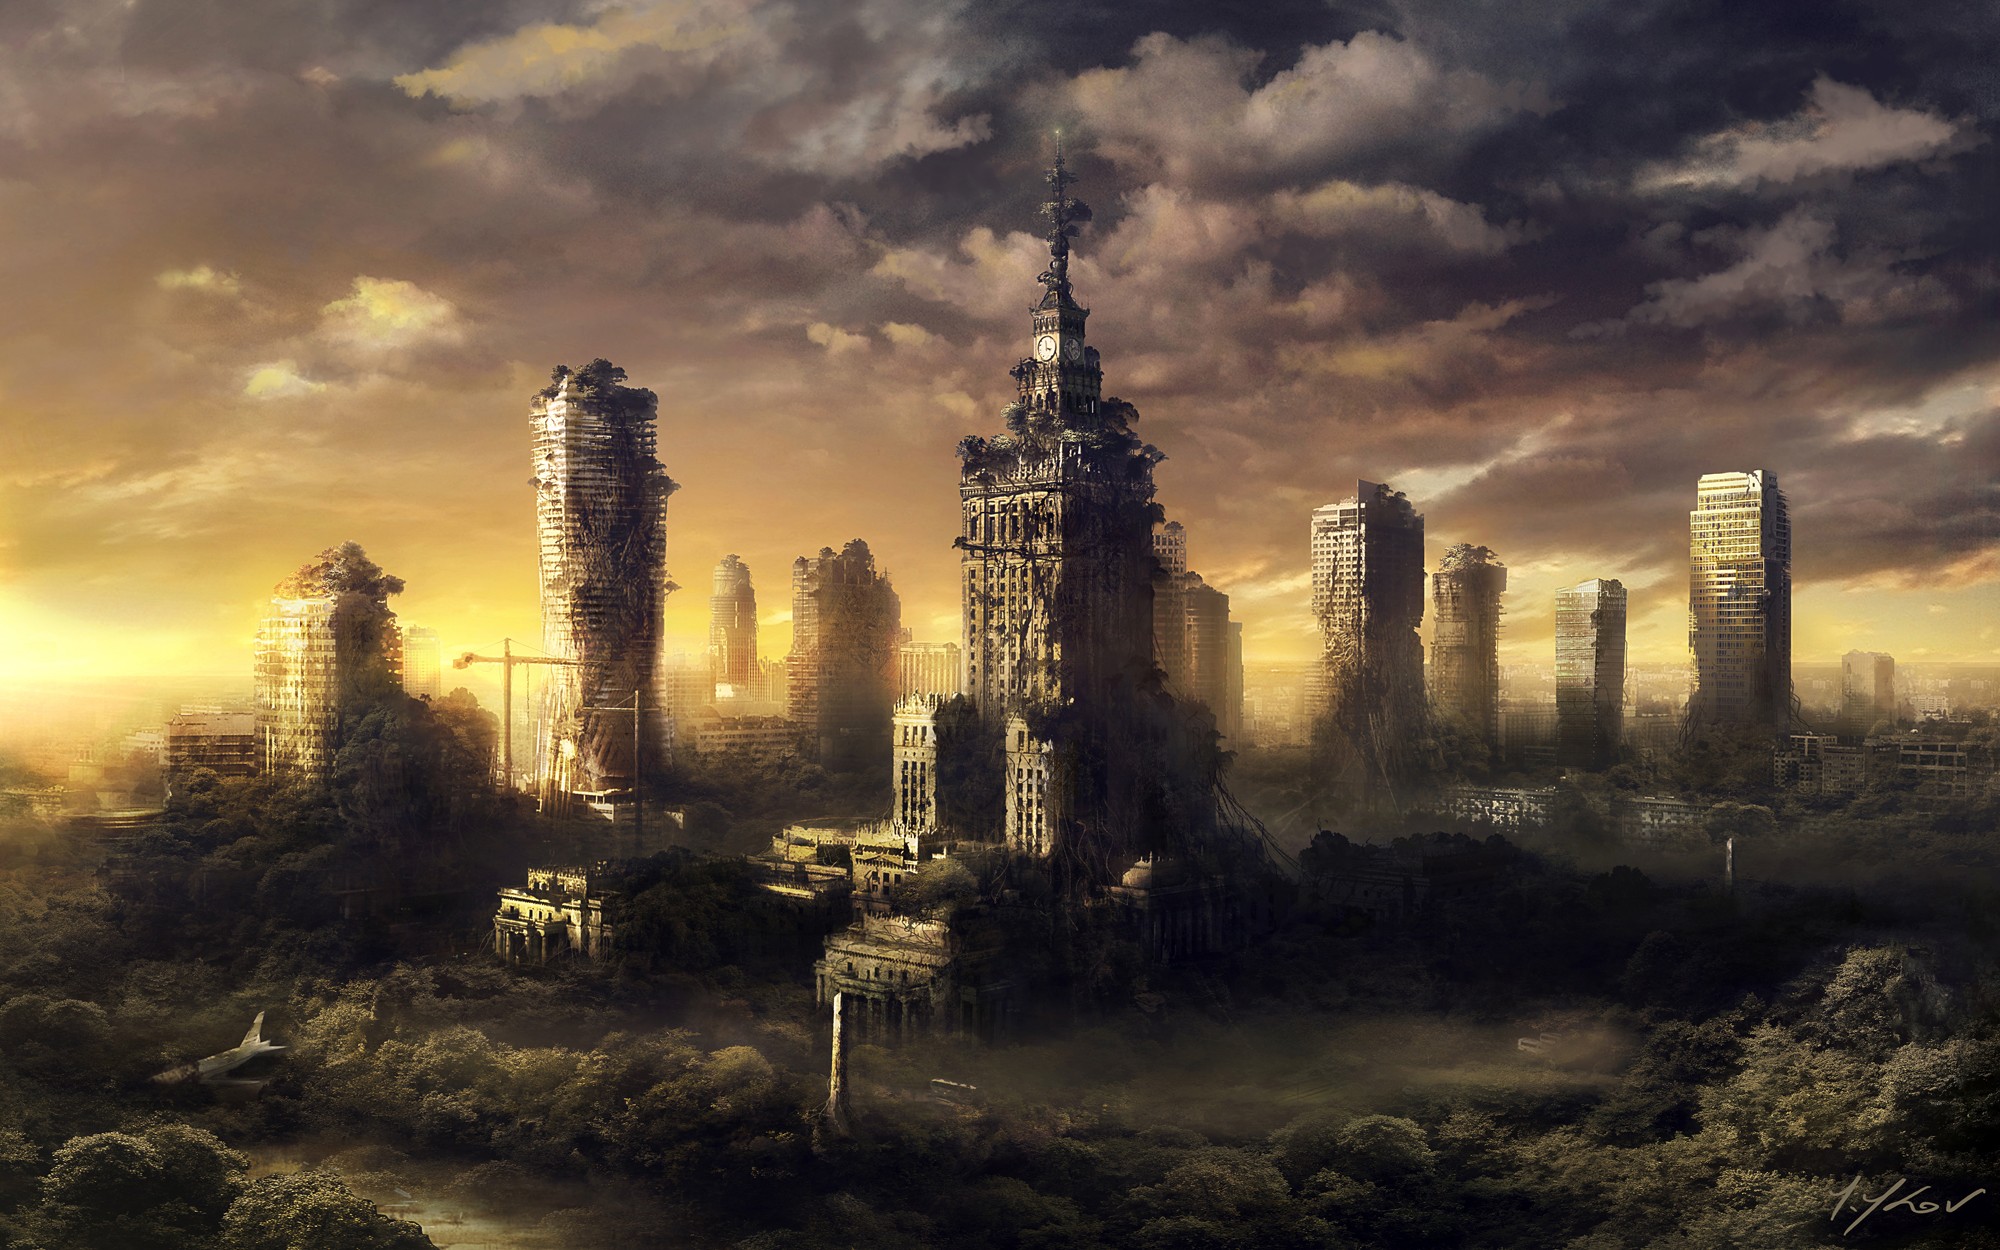 General 2000x1250 Warsaw apocalyptic futuristic digital art Palace of Culture and Science cityscape sky ruins